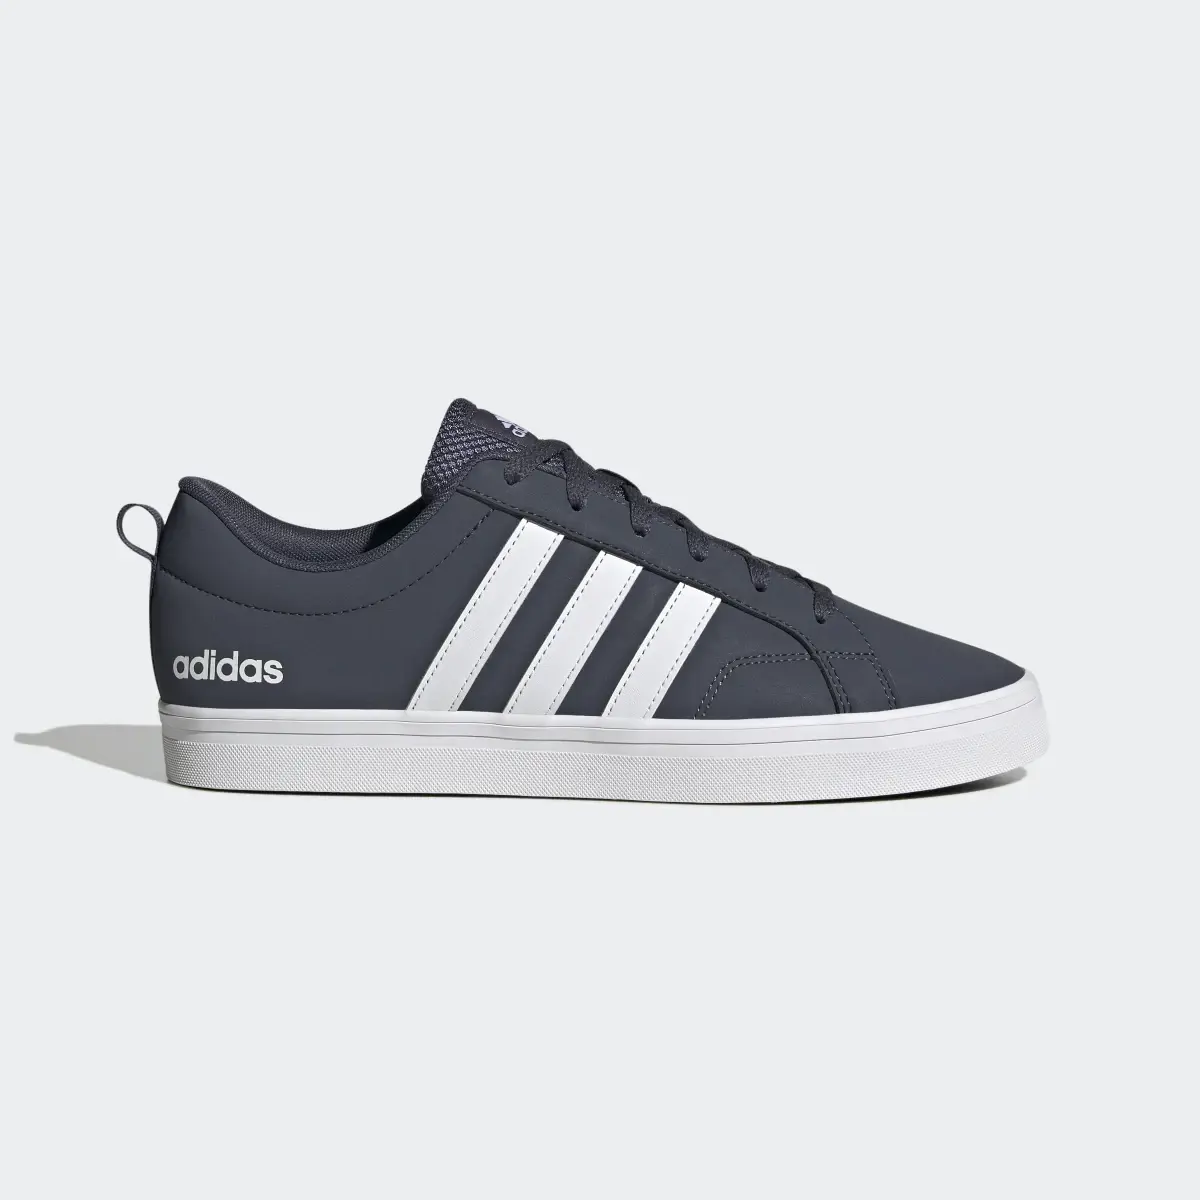 Adidas Chaussure VS Pace 2.0. 2